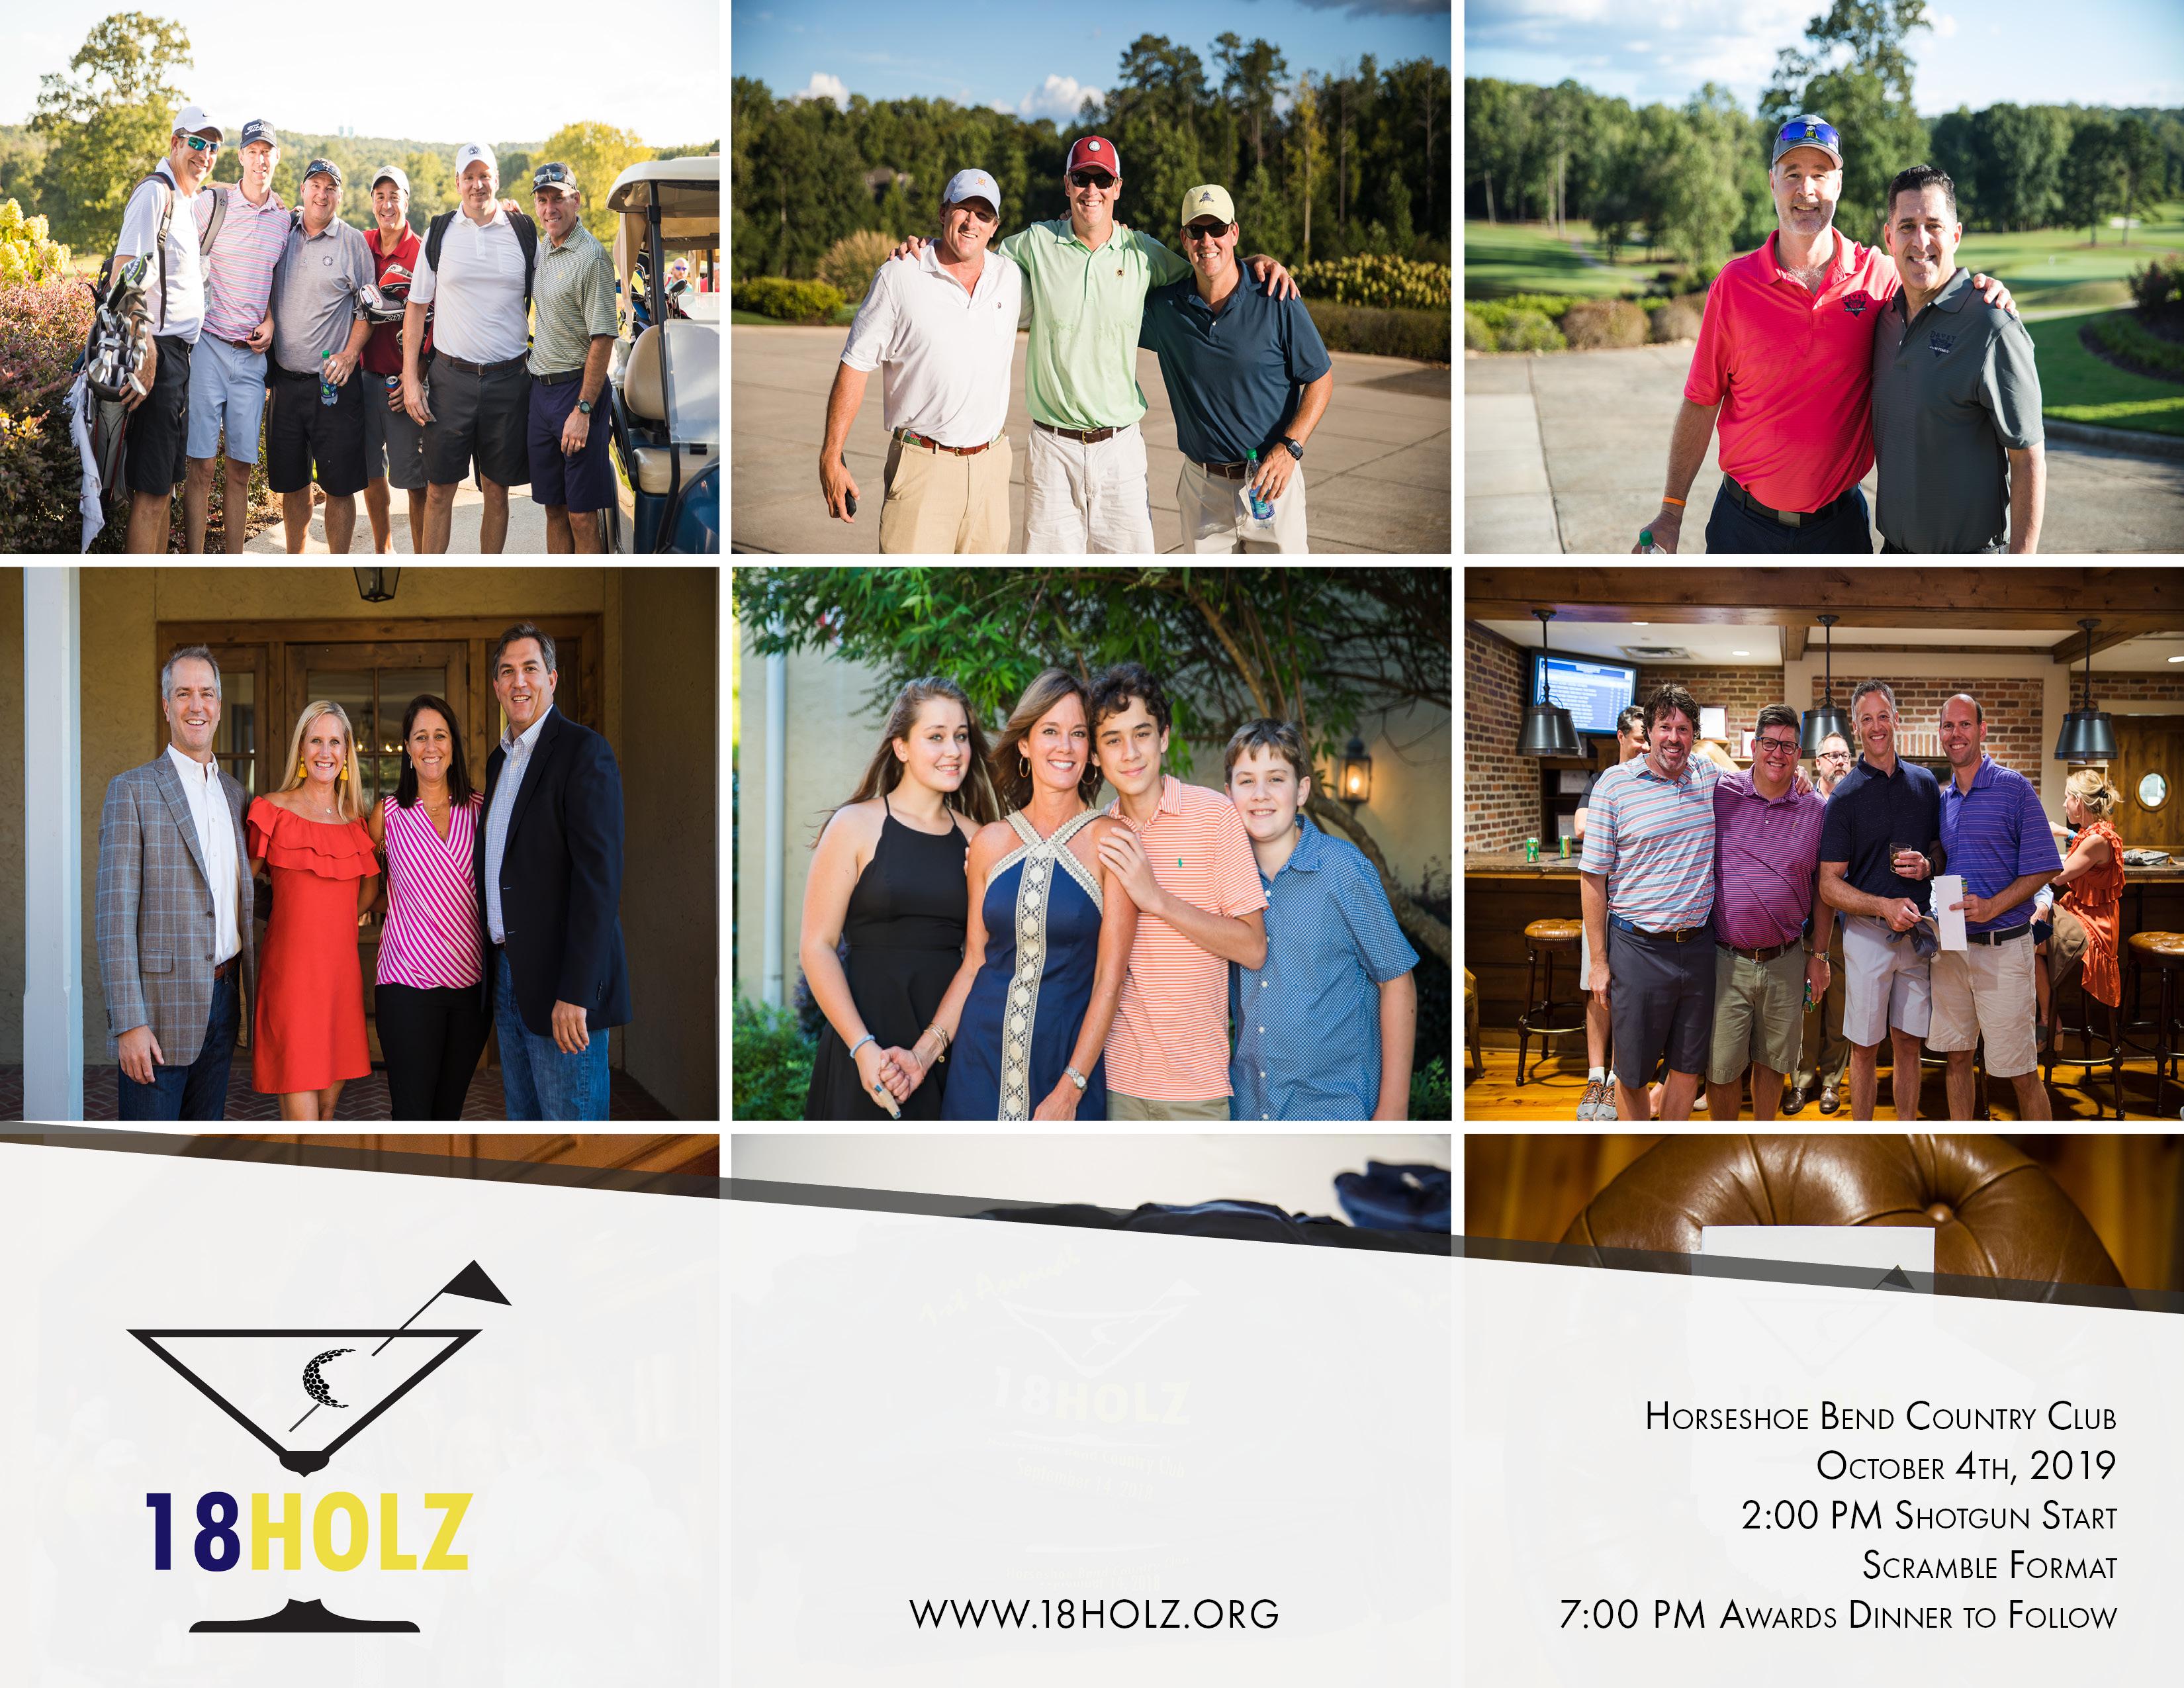 2nd Annual 18 Holz Golf Classic - Eric M. Holzworth Memorial Foundation